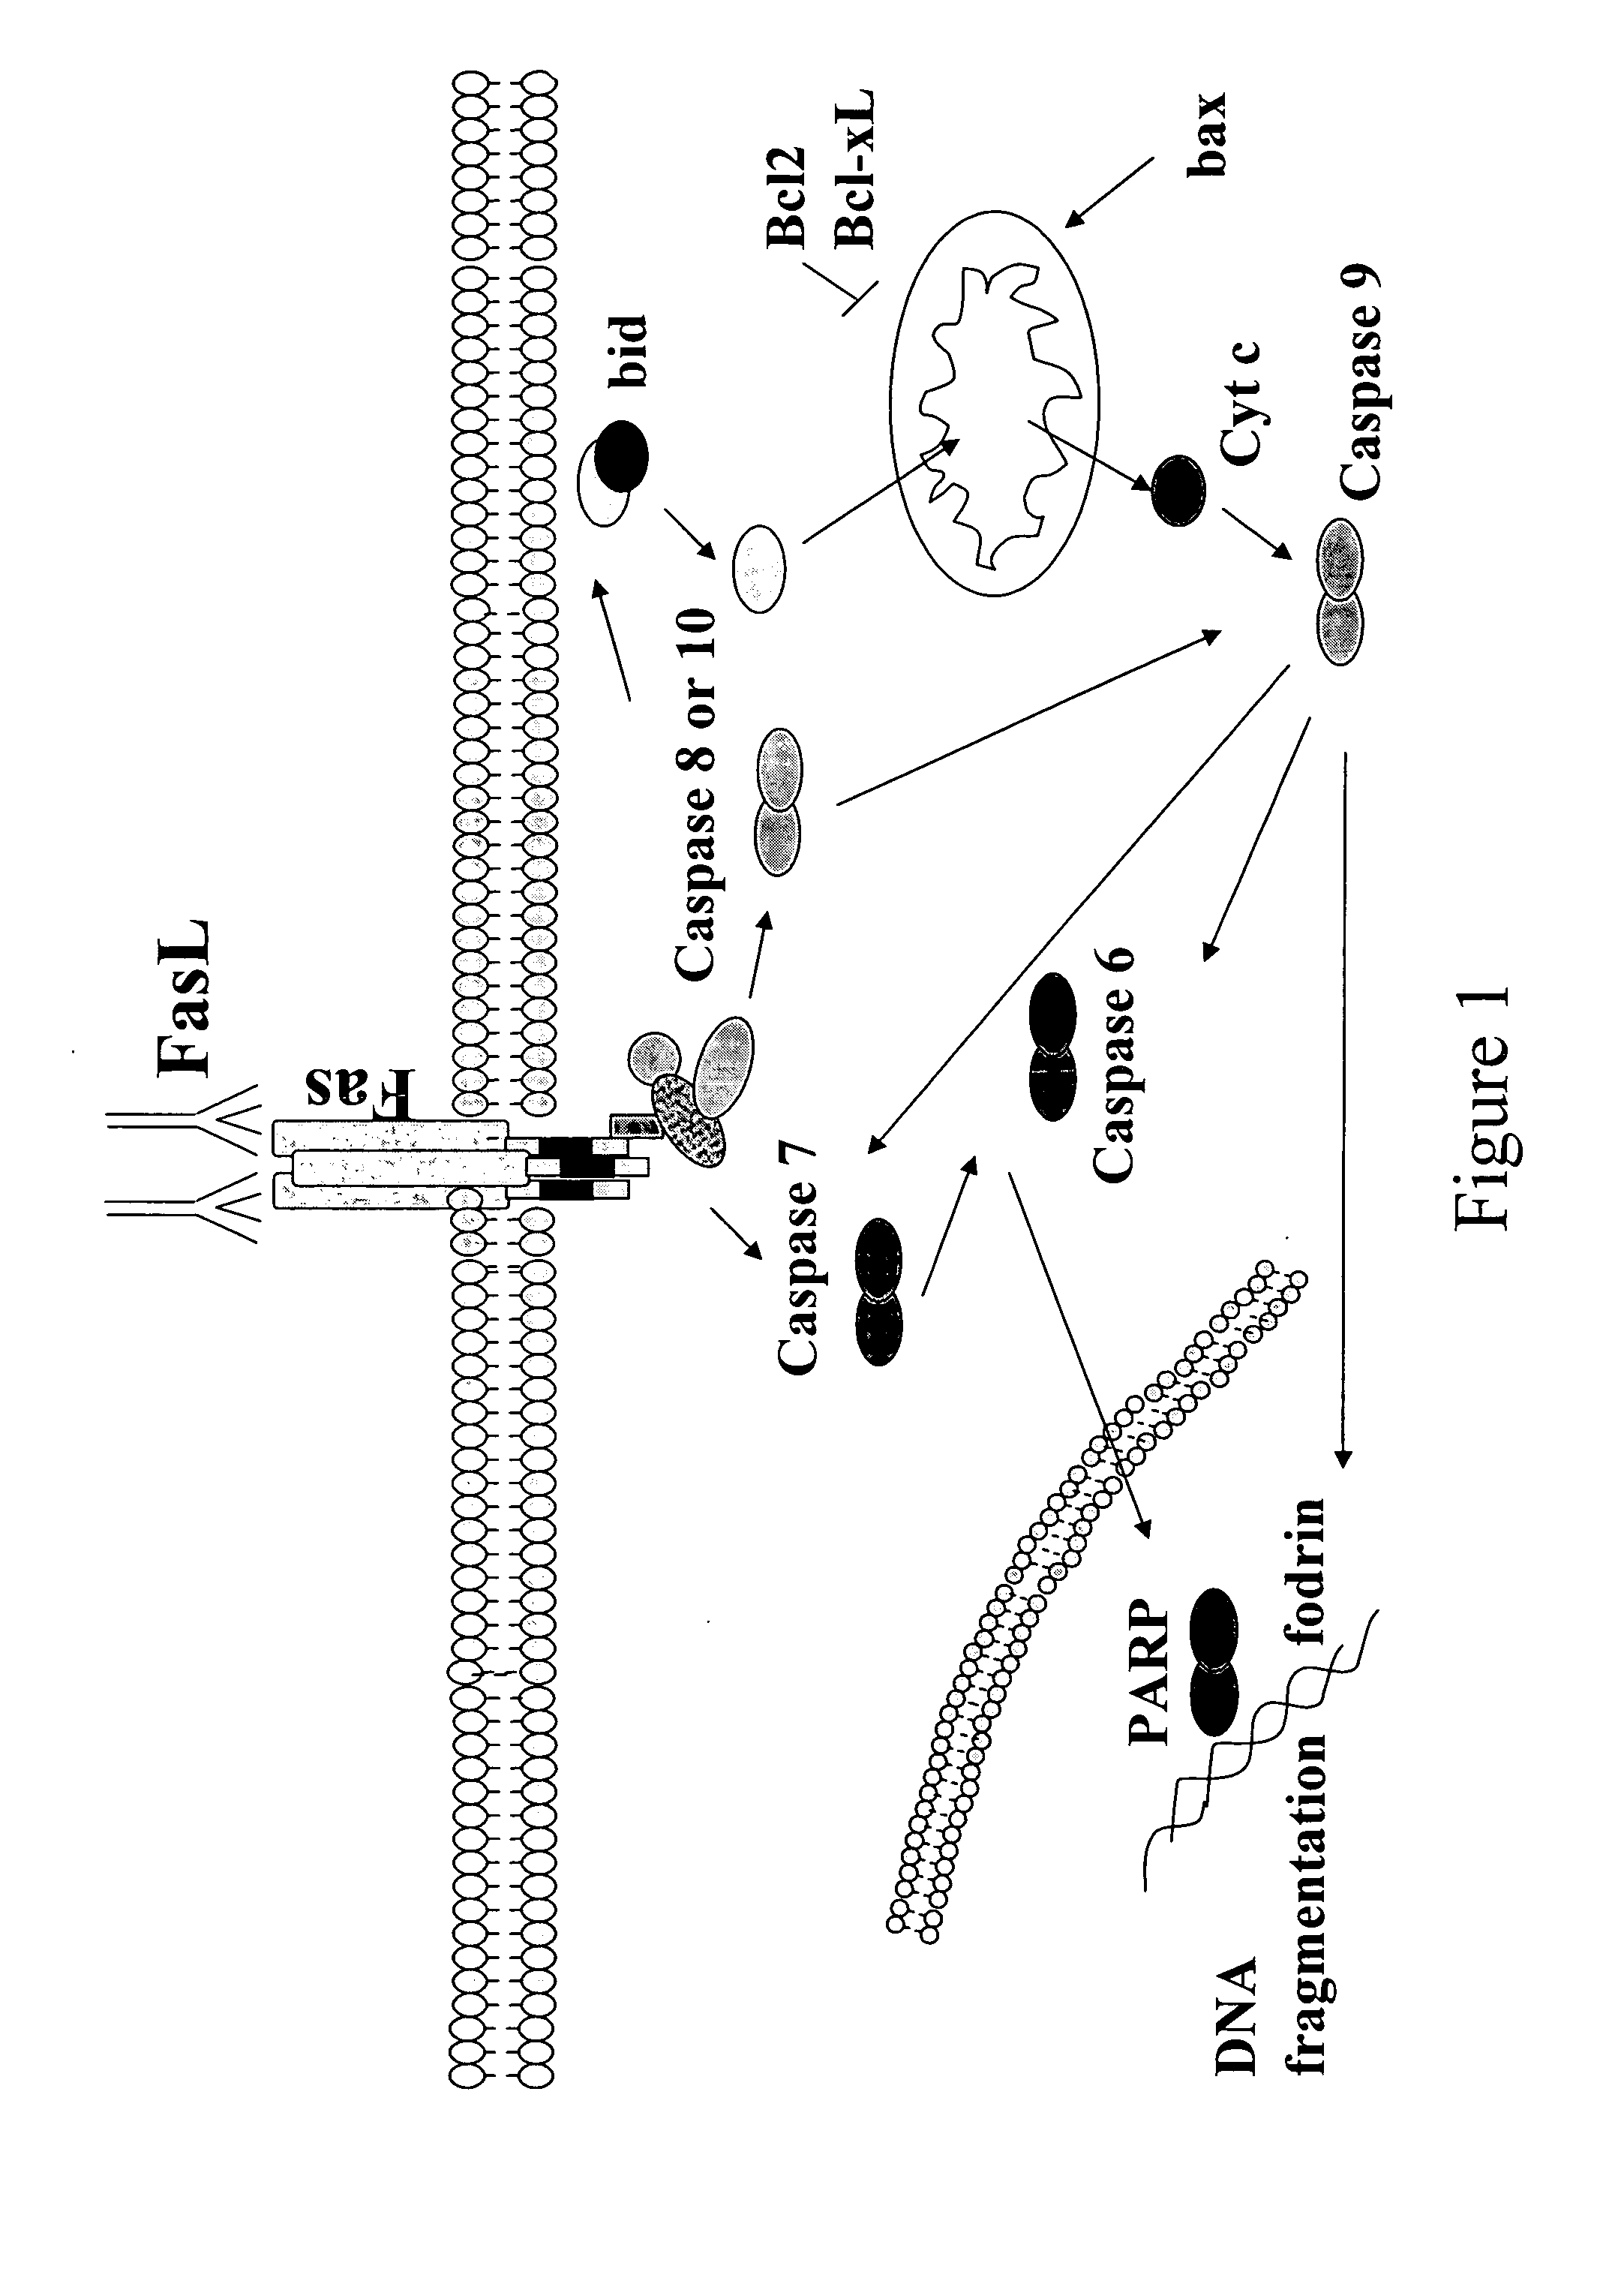 Methods and compositions for treating conditions of the eye